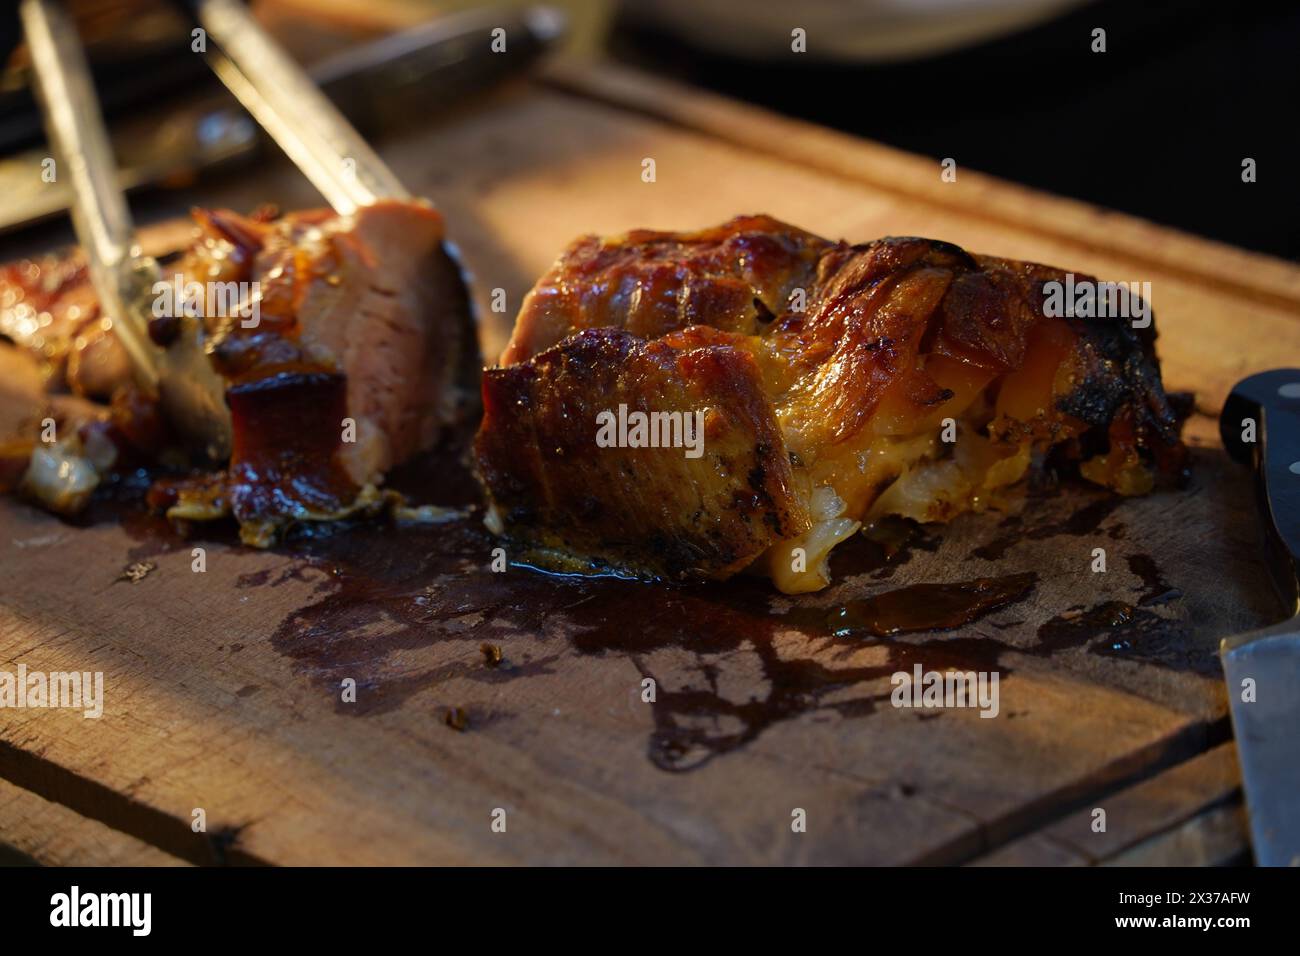 Roasted meat on wooden desk, grilled meat kebab Stock Photo